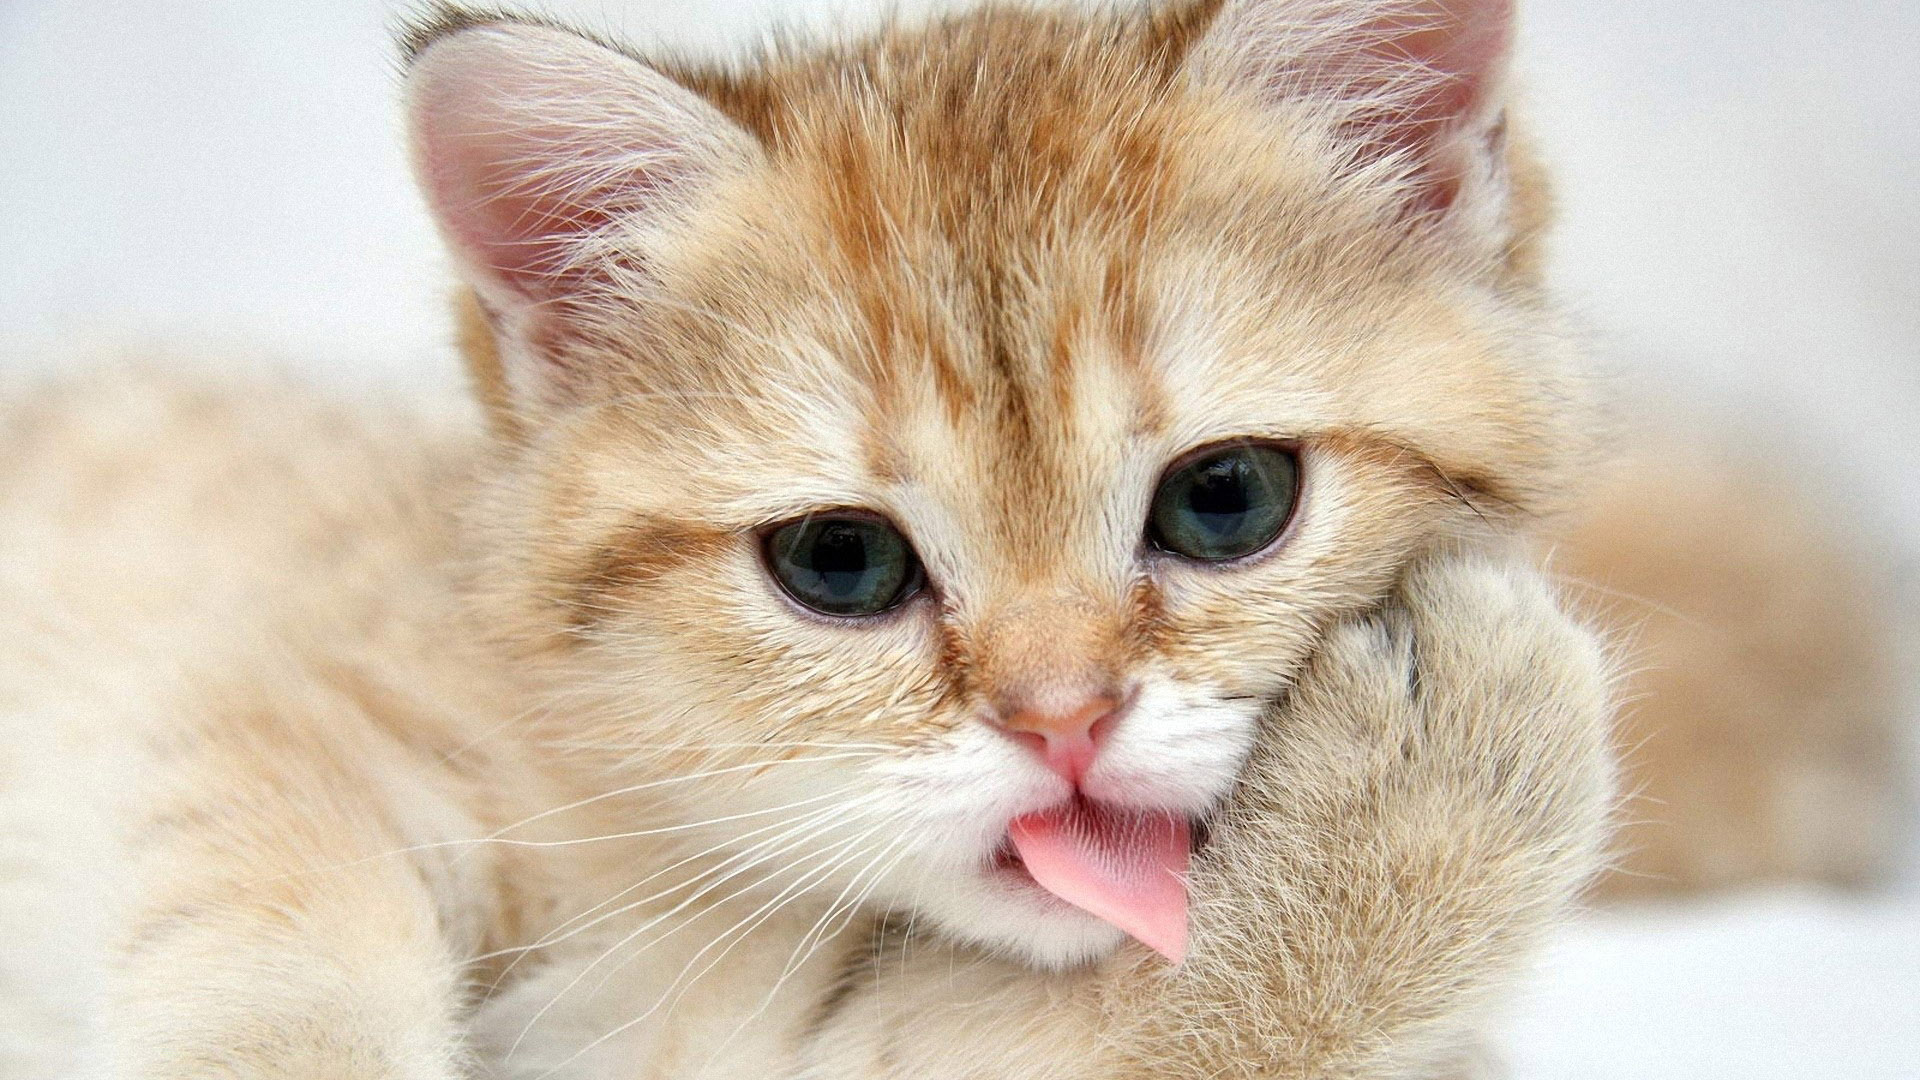 Cute Kittens Quotes Hd Wallpaper for Desktop Background High